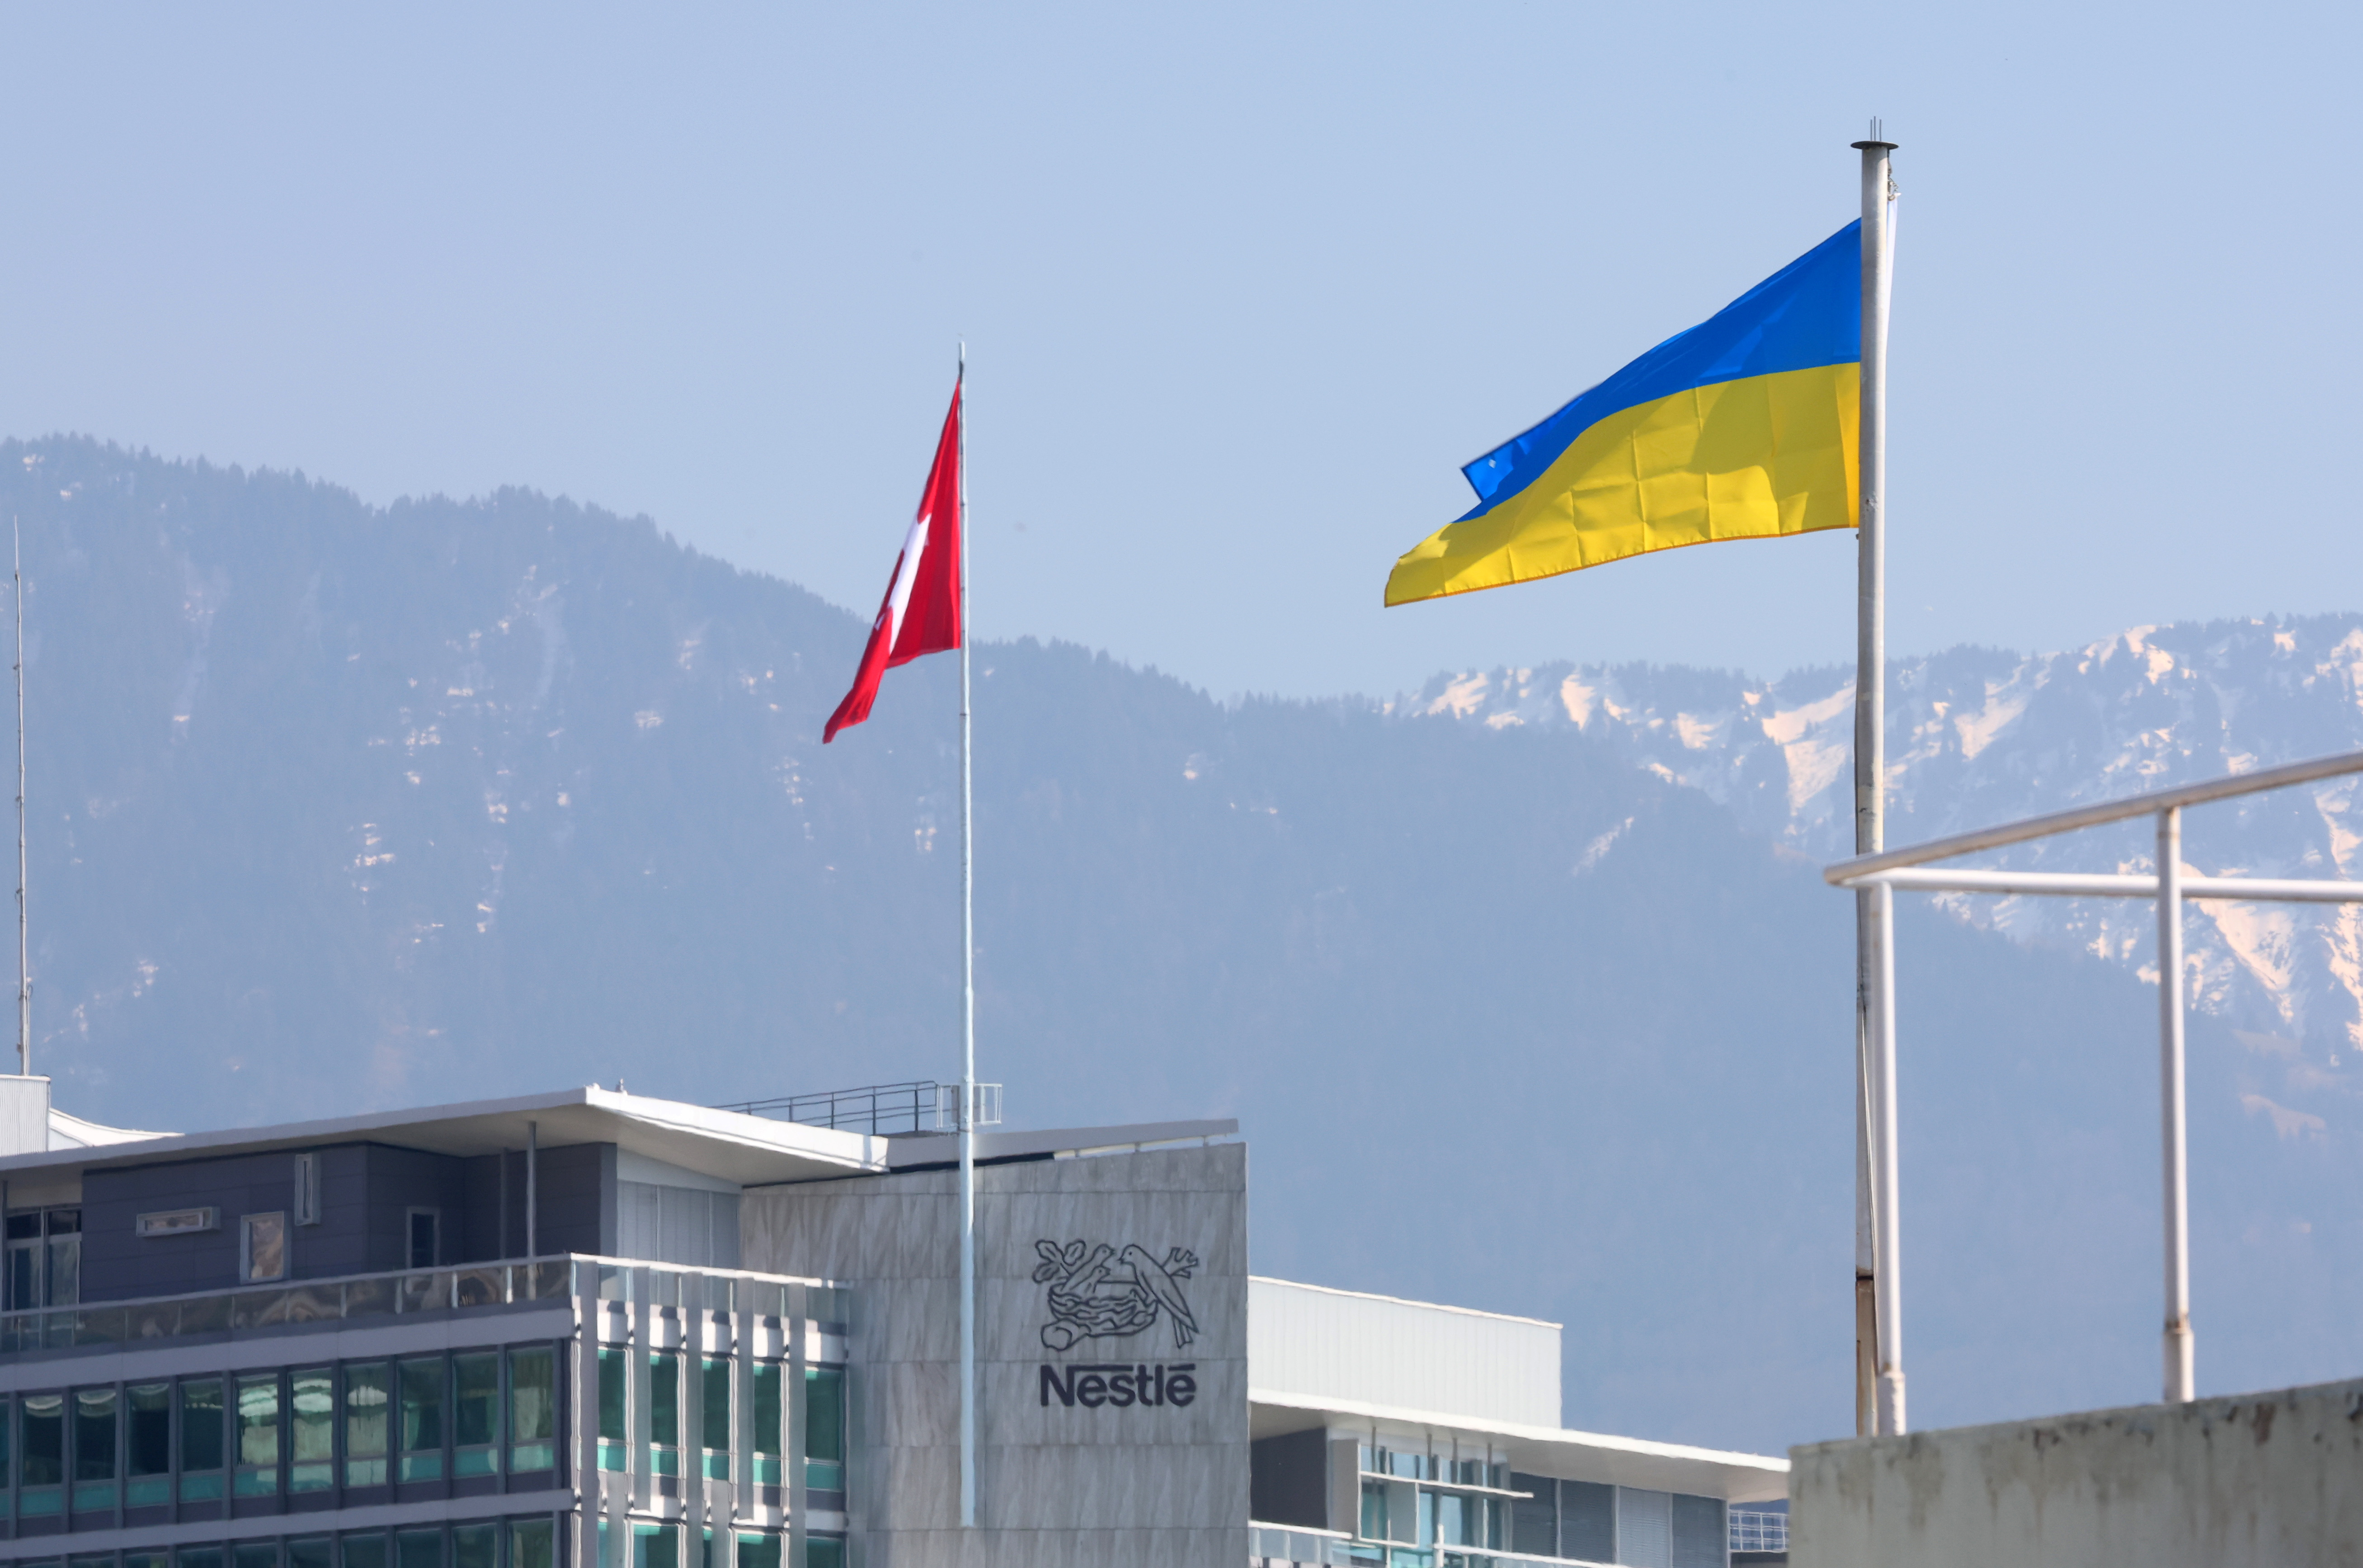 The flag of Ukraine is pictured in front of the headquarters of food giant Nestle in Vevey